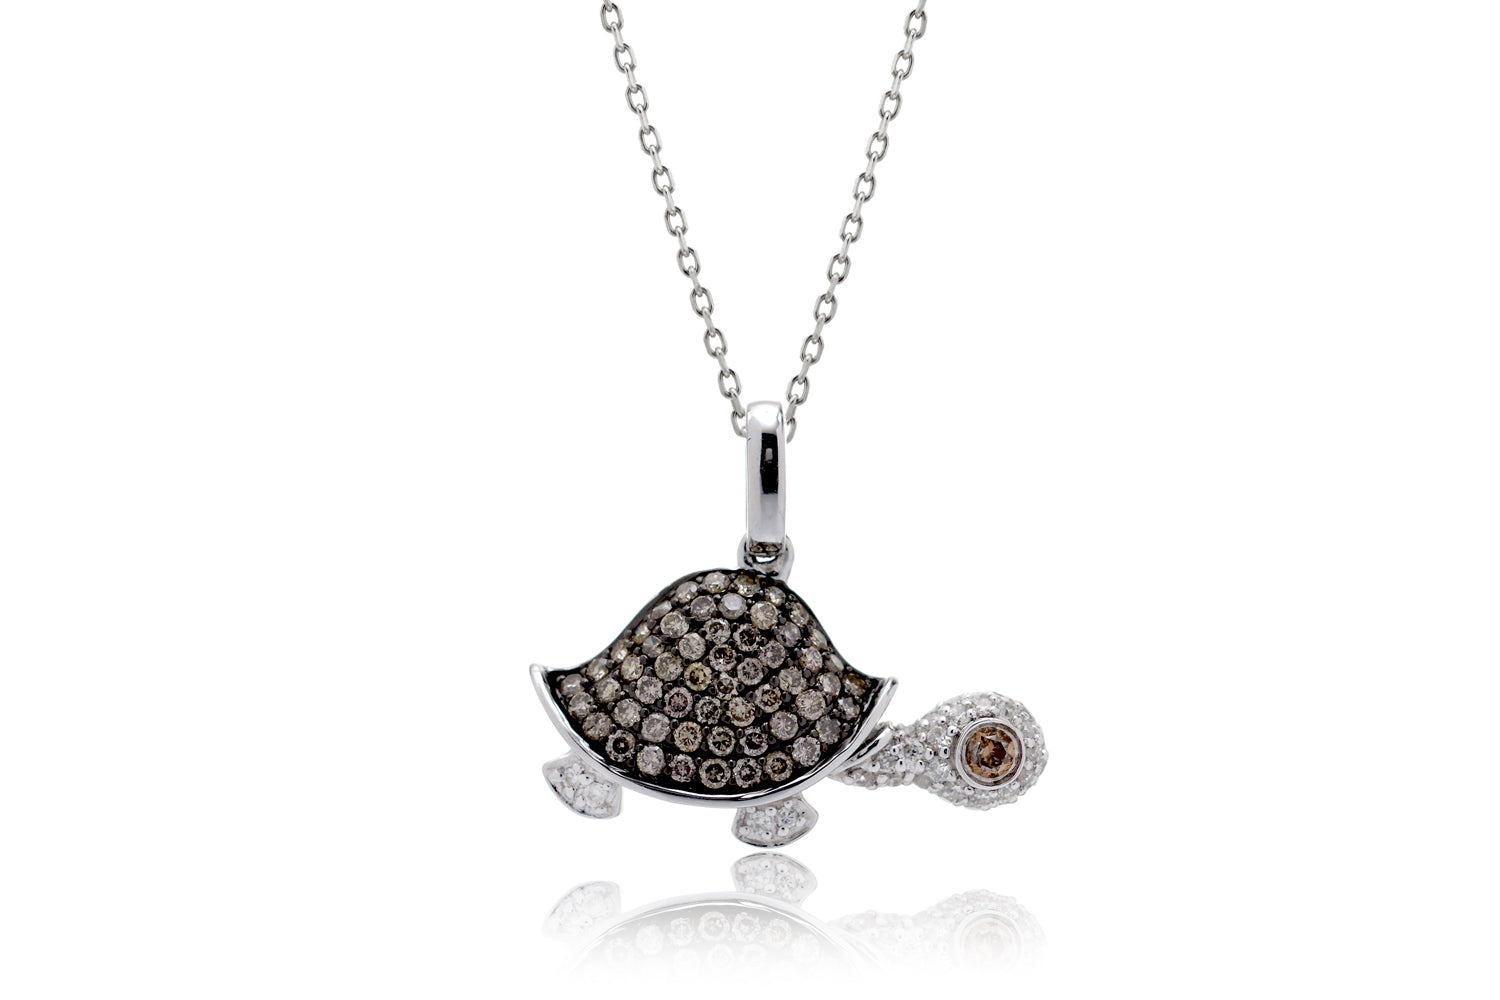 Turtle necklace with champagne diamond